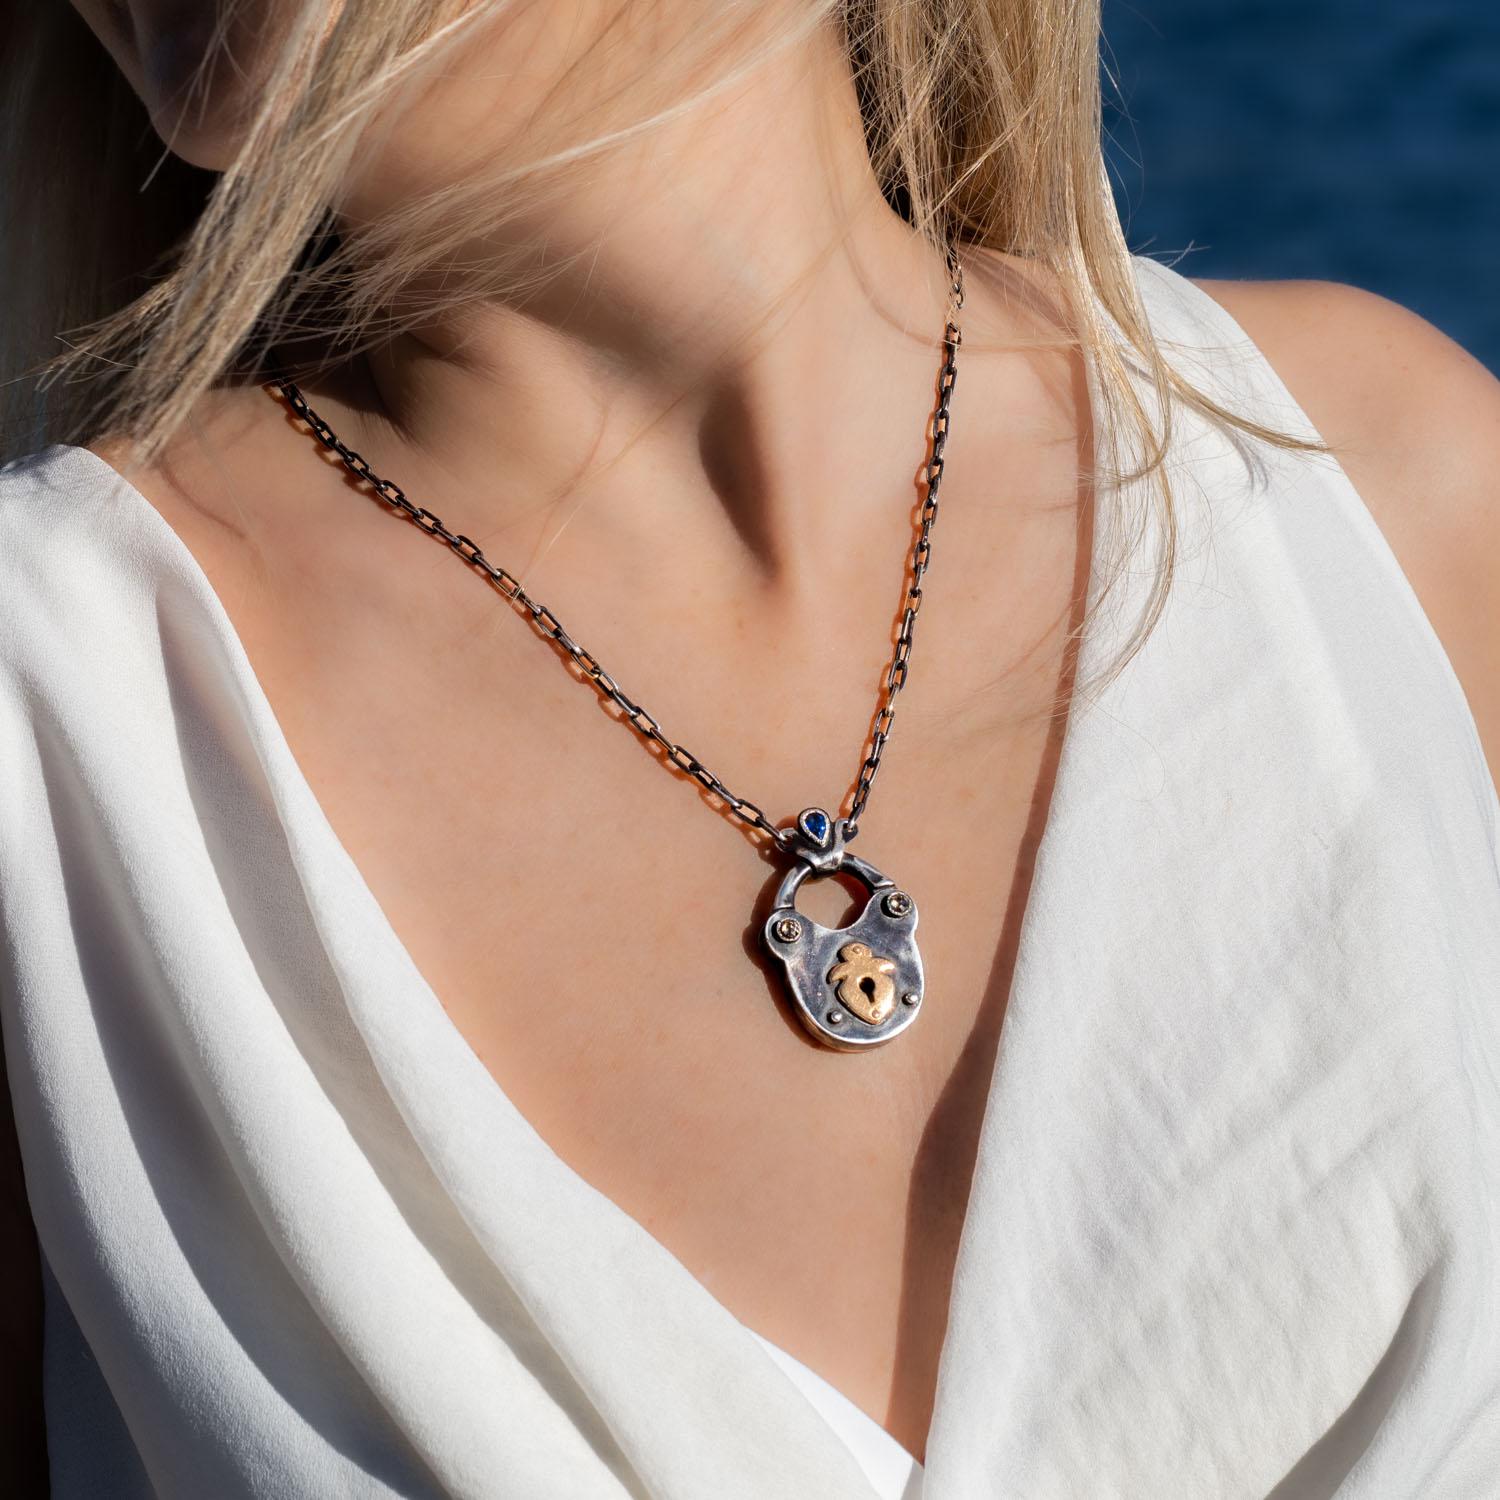 This charming 18K gold and oxidized sterling silver lock pendant necklace has an antique look dating back to medieval ages. The pendant is set with two rosecut diamonds and a pear shaped blue sapphire.

Lock necklace serial number T237
brown rosecut